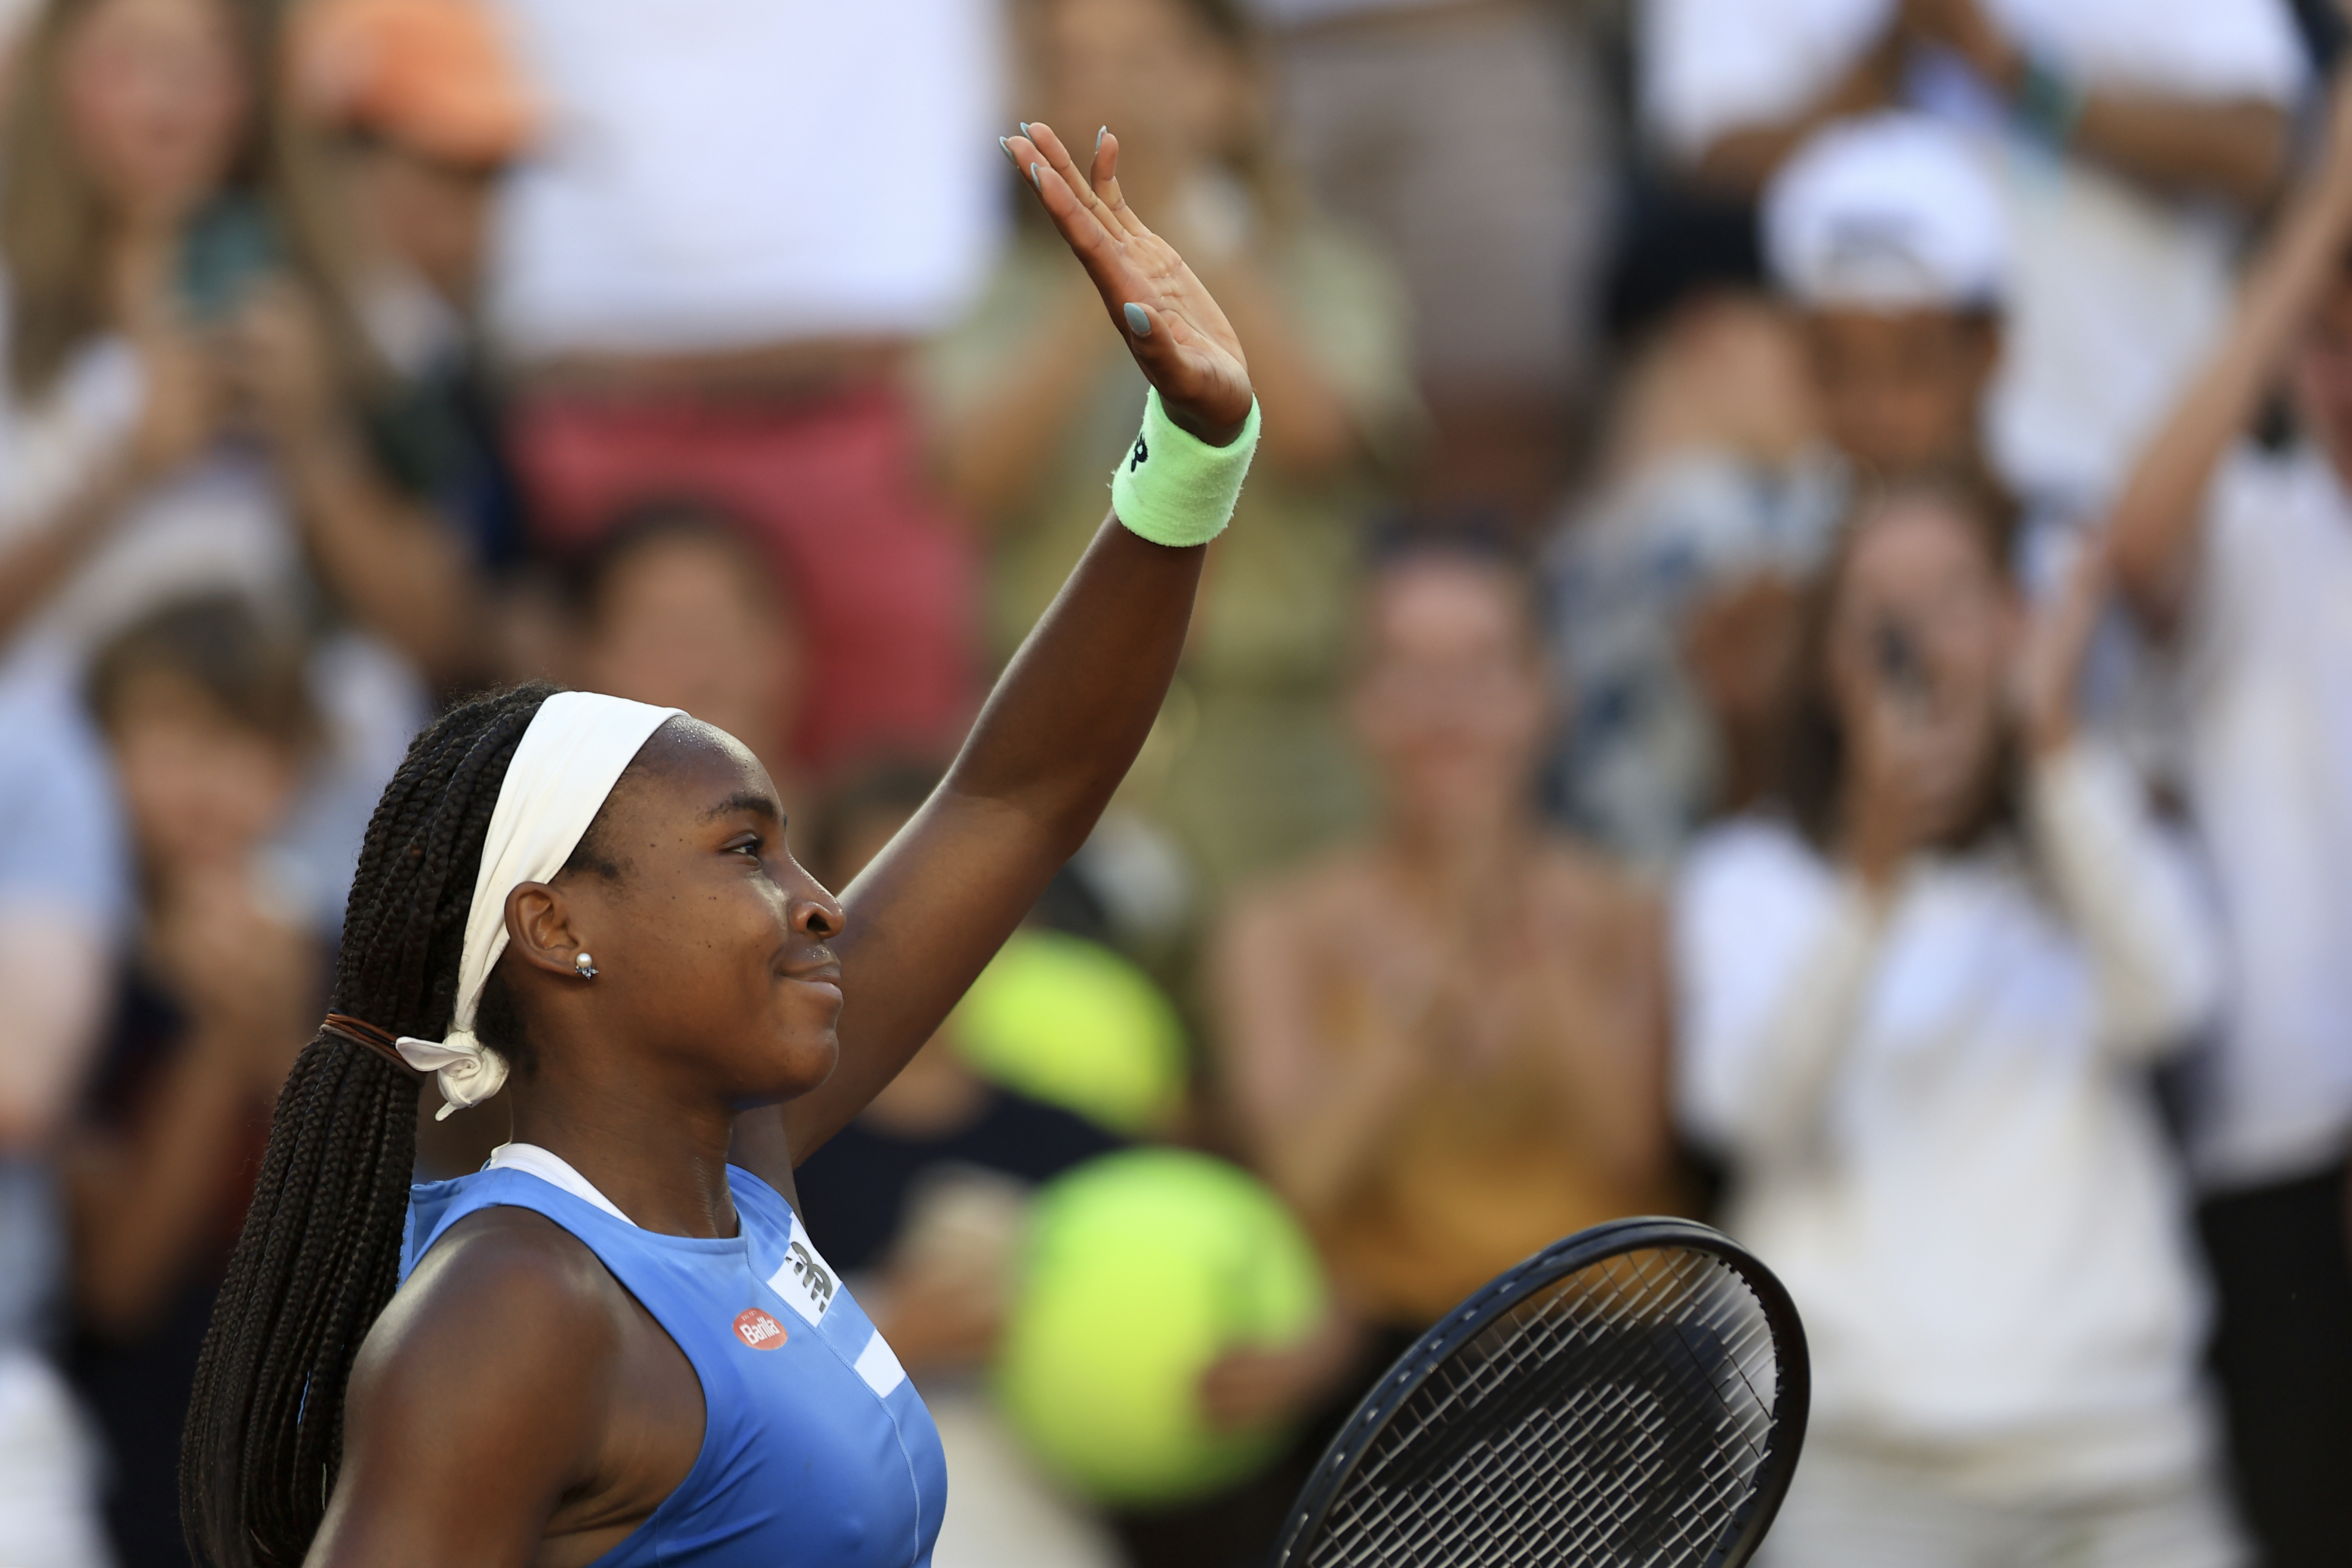 French Open 2023 Gauff, 19, plays Andreeva, 16, in all-teen showdown; Nadal has hip surgery